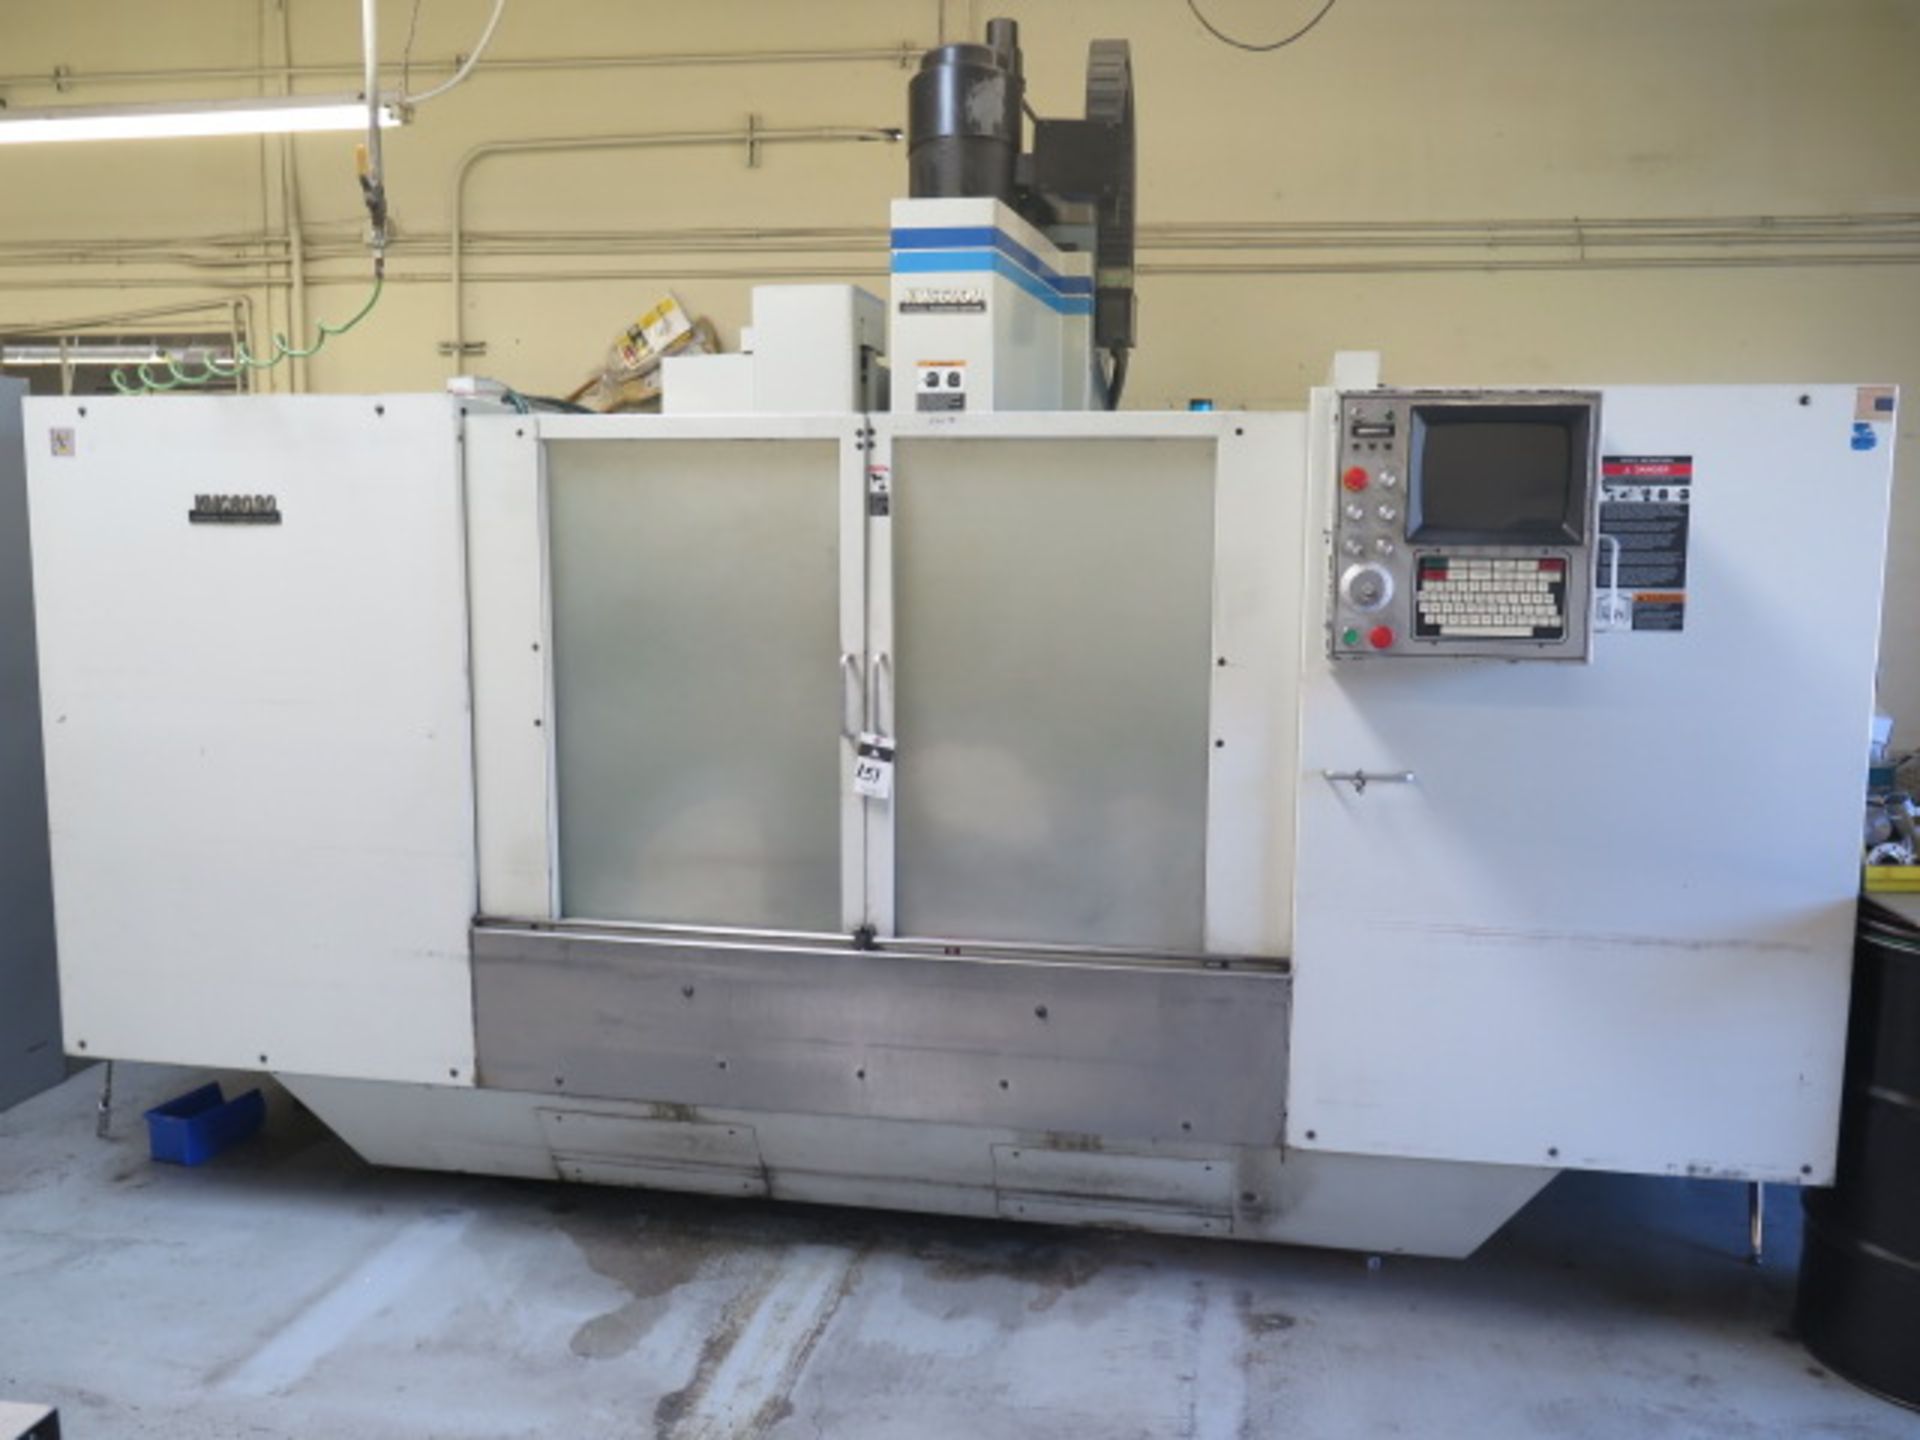 Fadal VMC6030 HT mdl. 907-1 CNC Vertical Machining Center (Factory Remanufactured in 2007) s/n